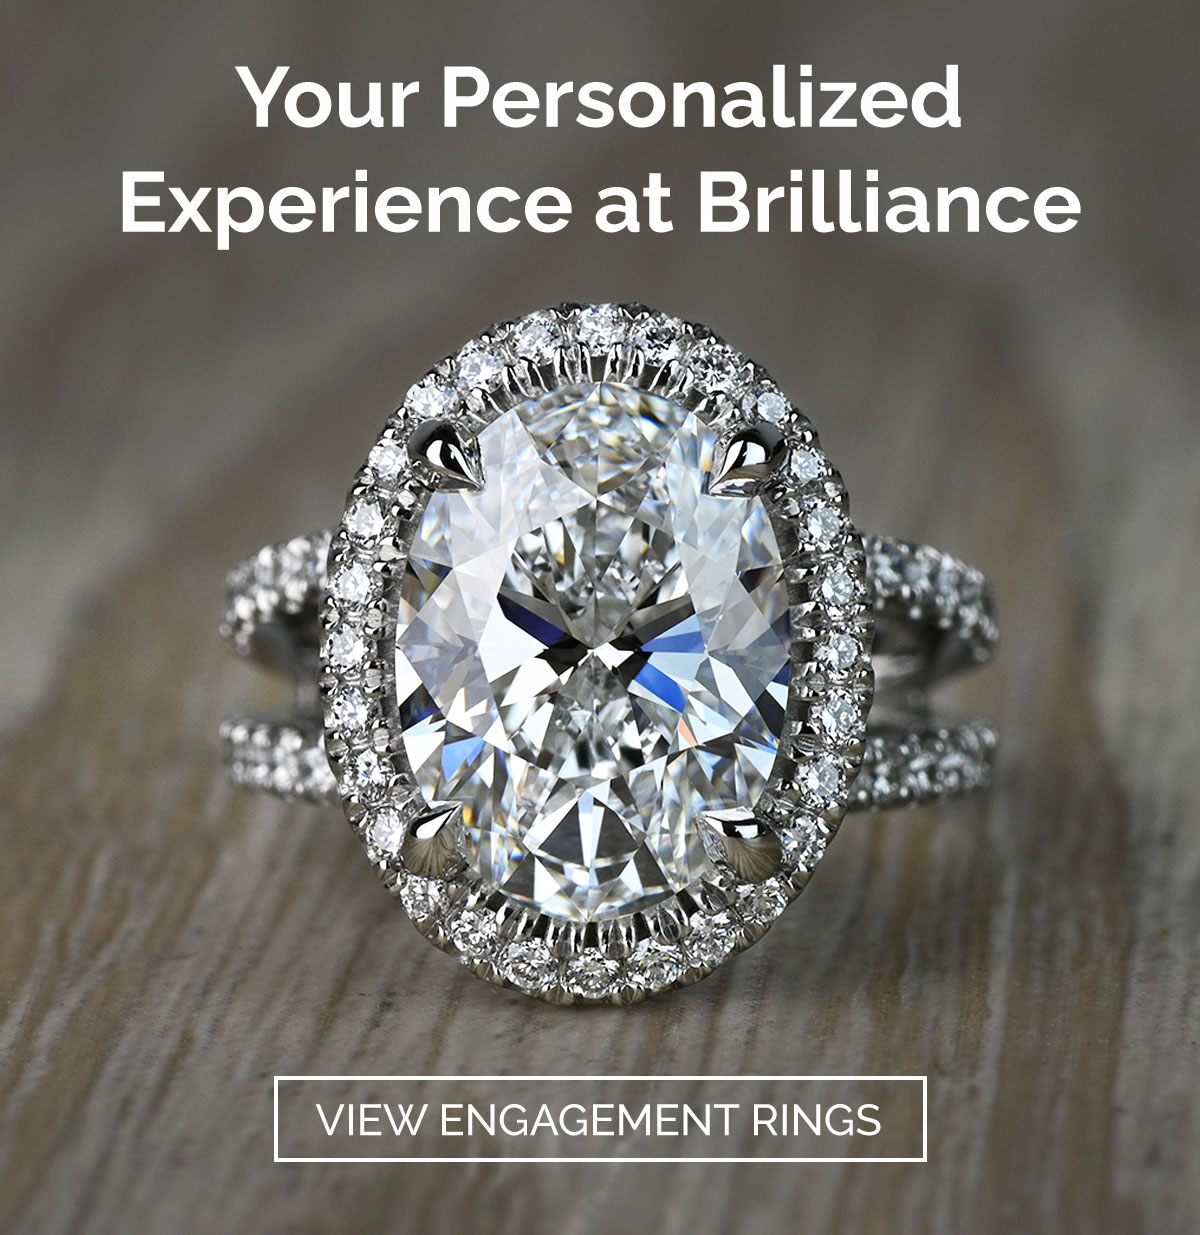 Your Personalized Experience at Brilliance View Engagement Rings